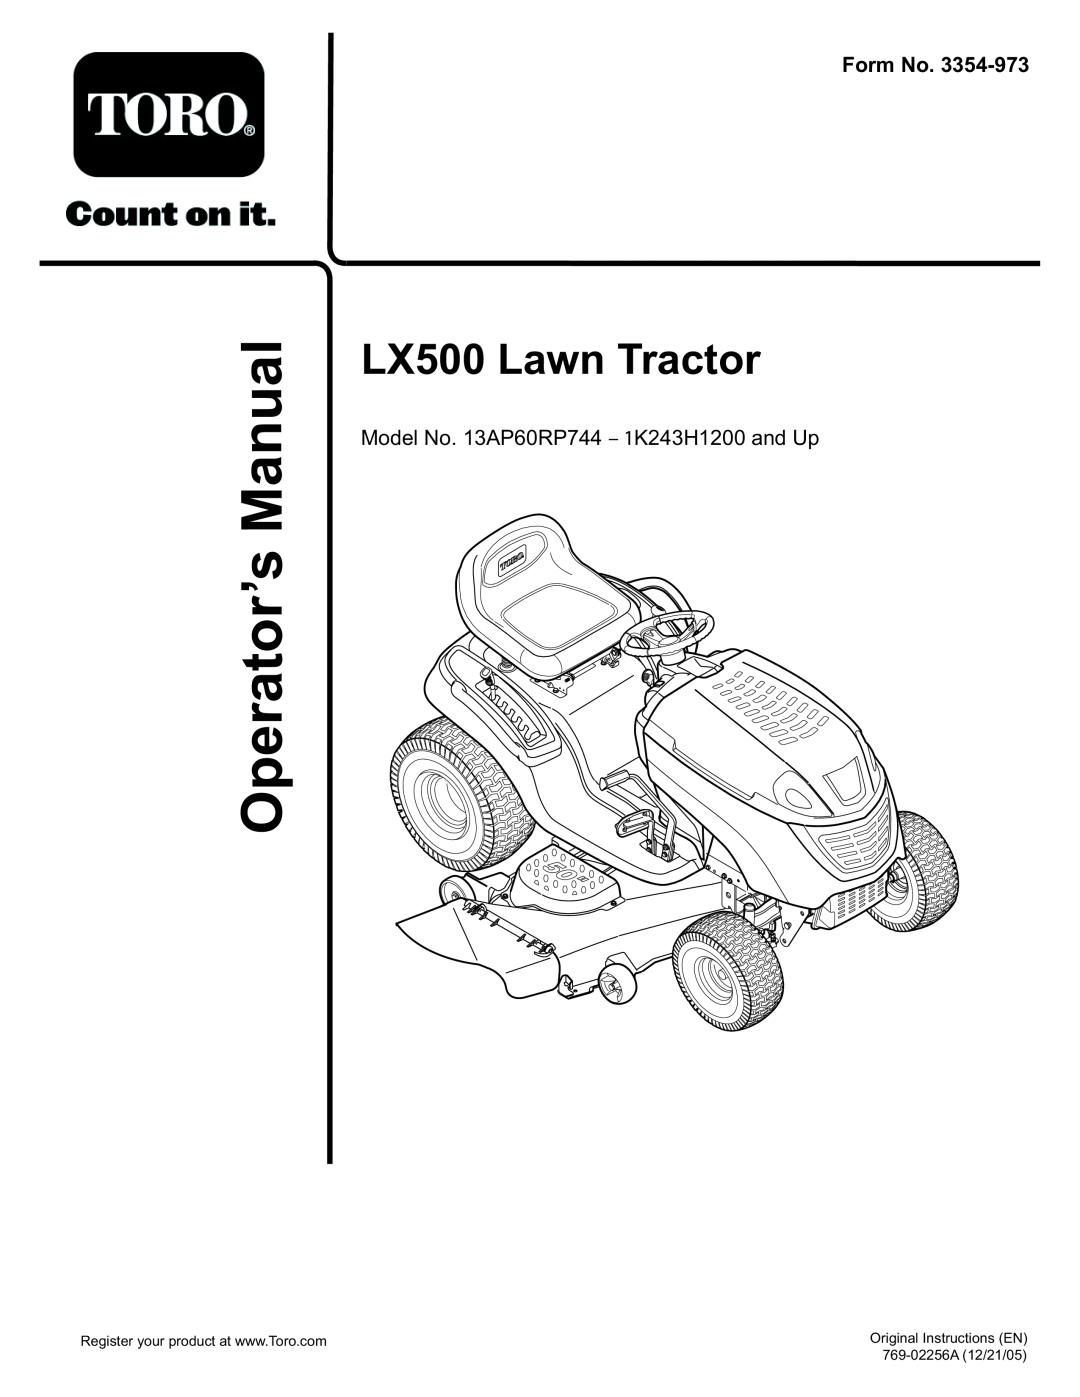 Toro manual ManualOperator’s, Form No, LX500 Lawn Tractor, Model No. 13AP60RP744 - 1K243H1200 and Up 